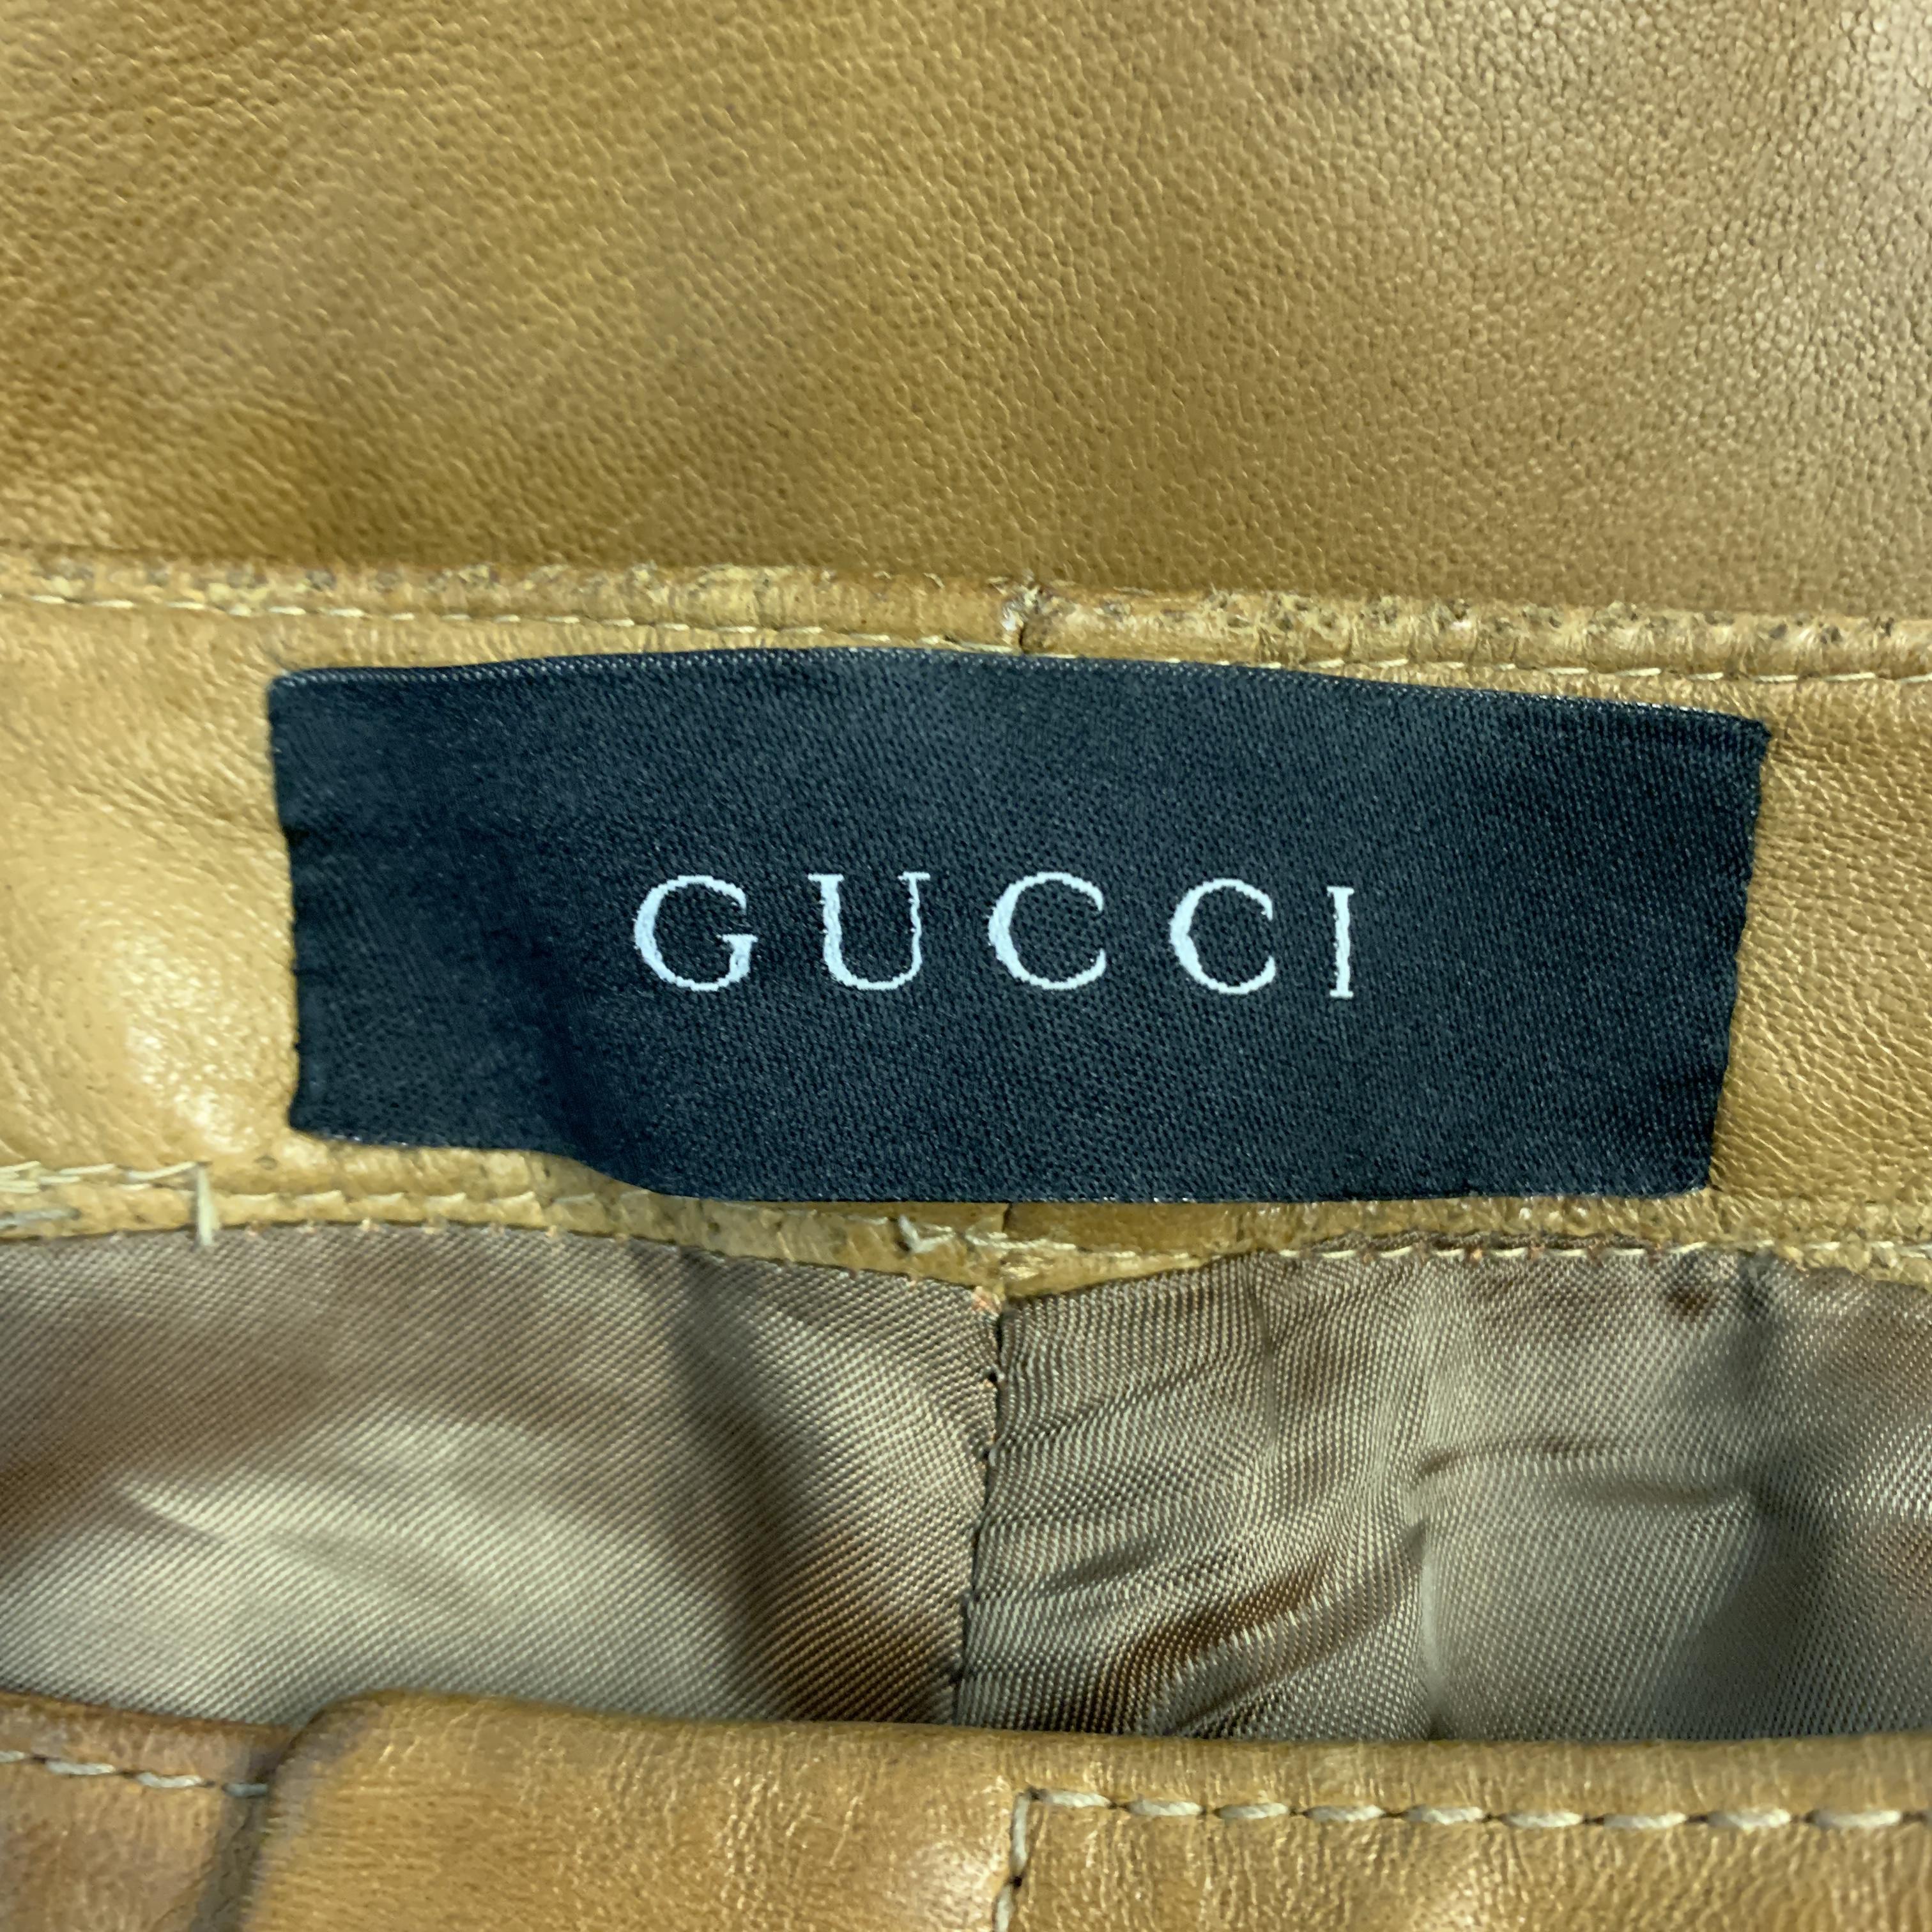 GUCCI by TOM FORD Size 30 Tan Leather Motorcycle Pants 5